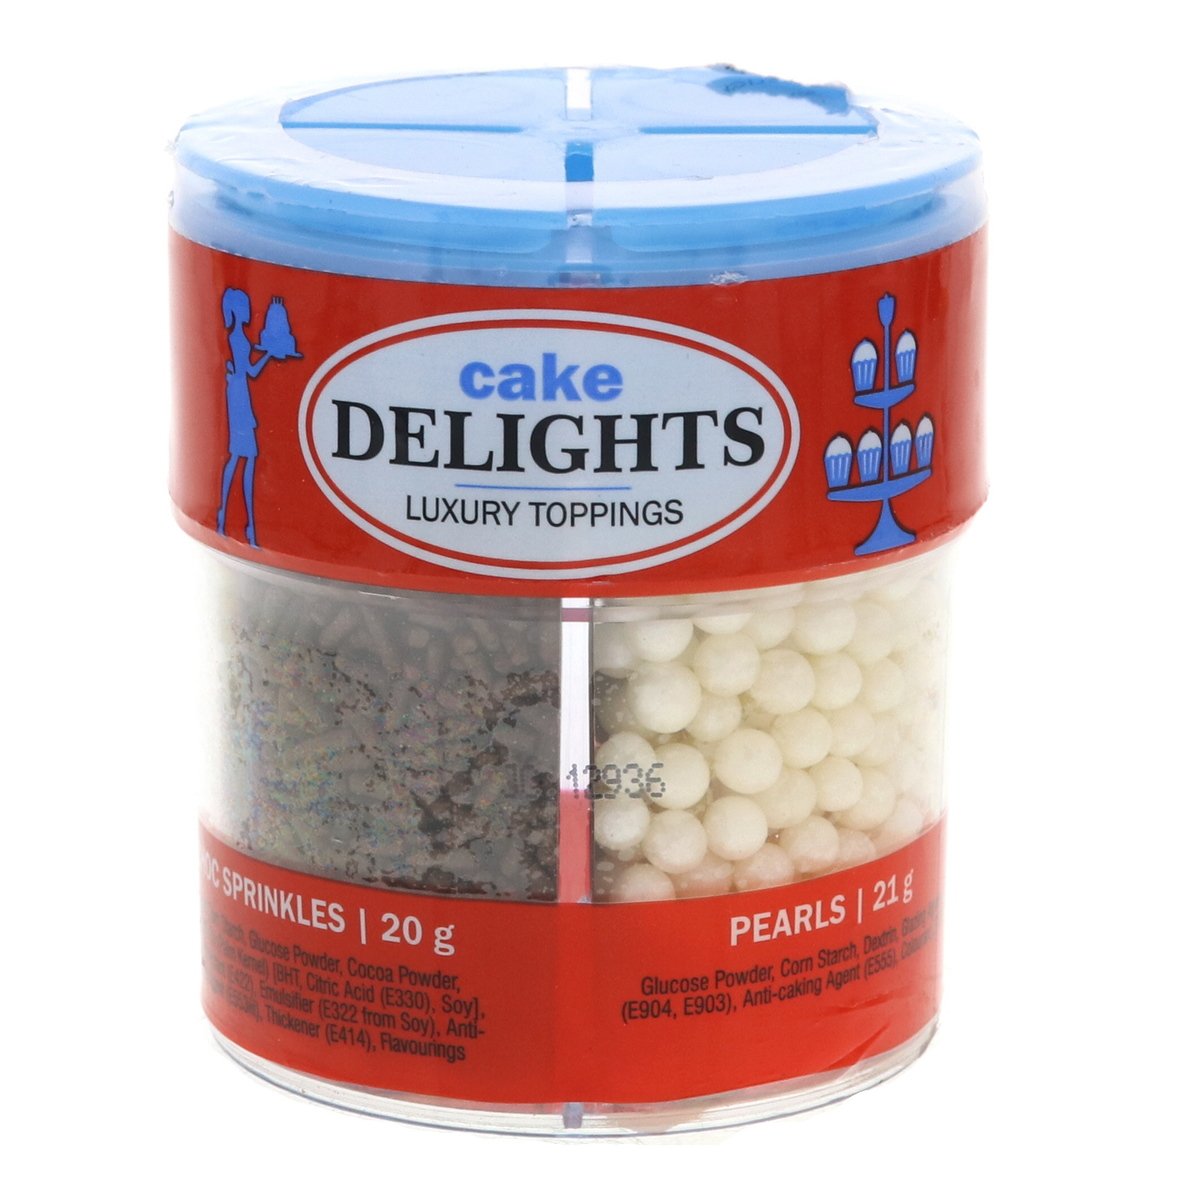 Cake Delights Cake Luxury Toppings 87g